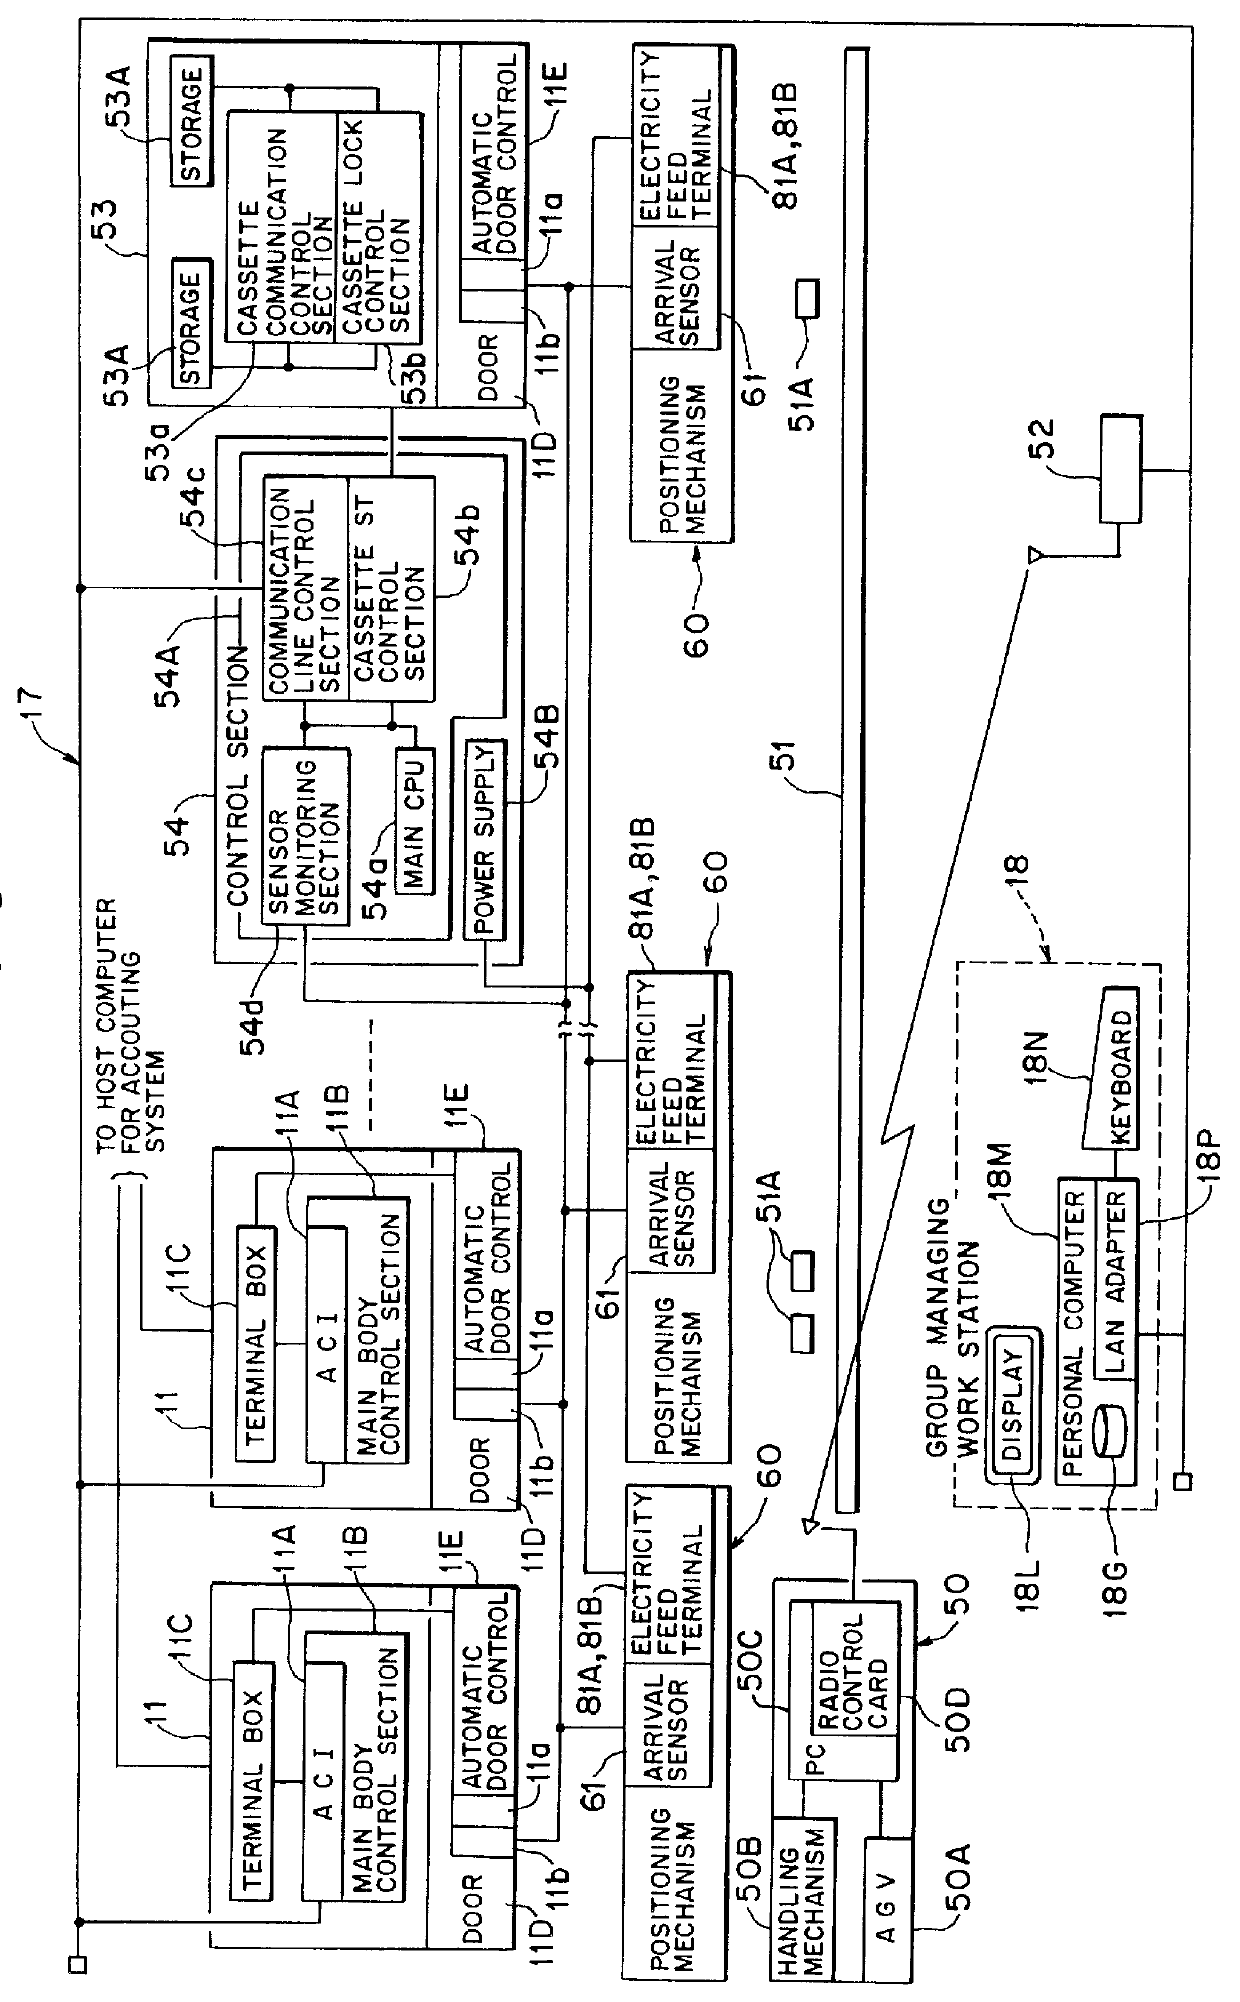 ATM operation supporting system